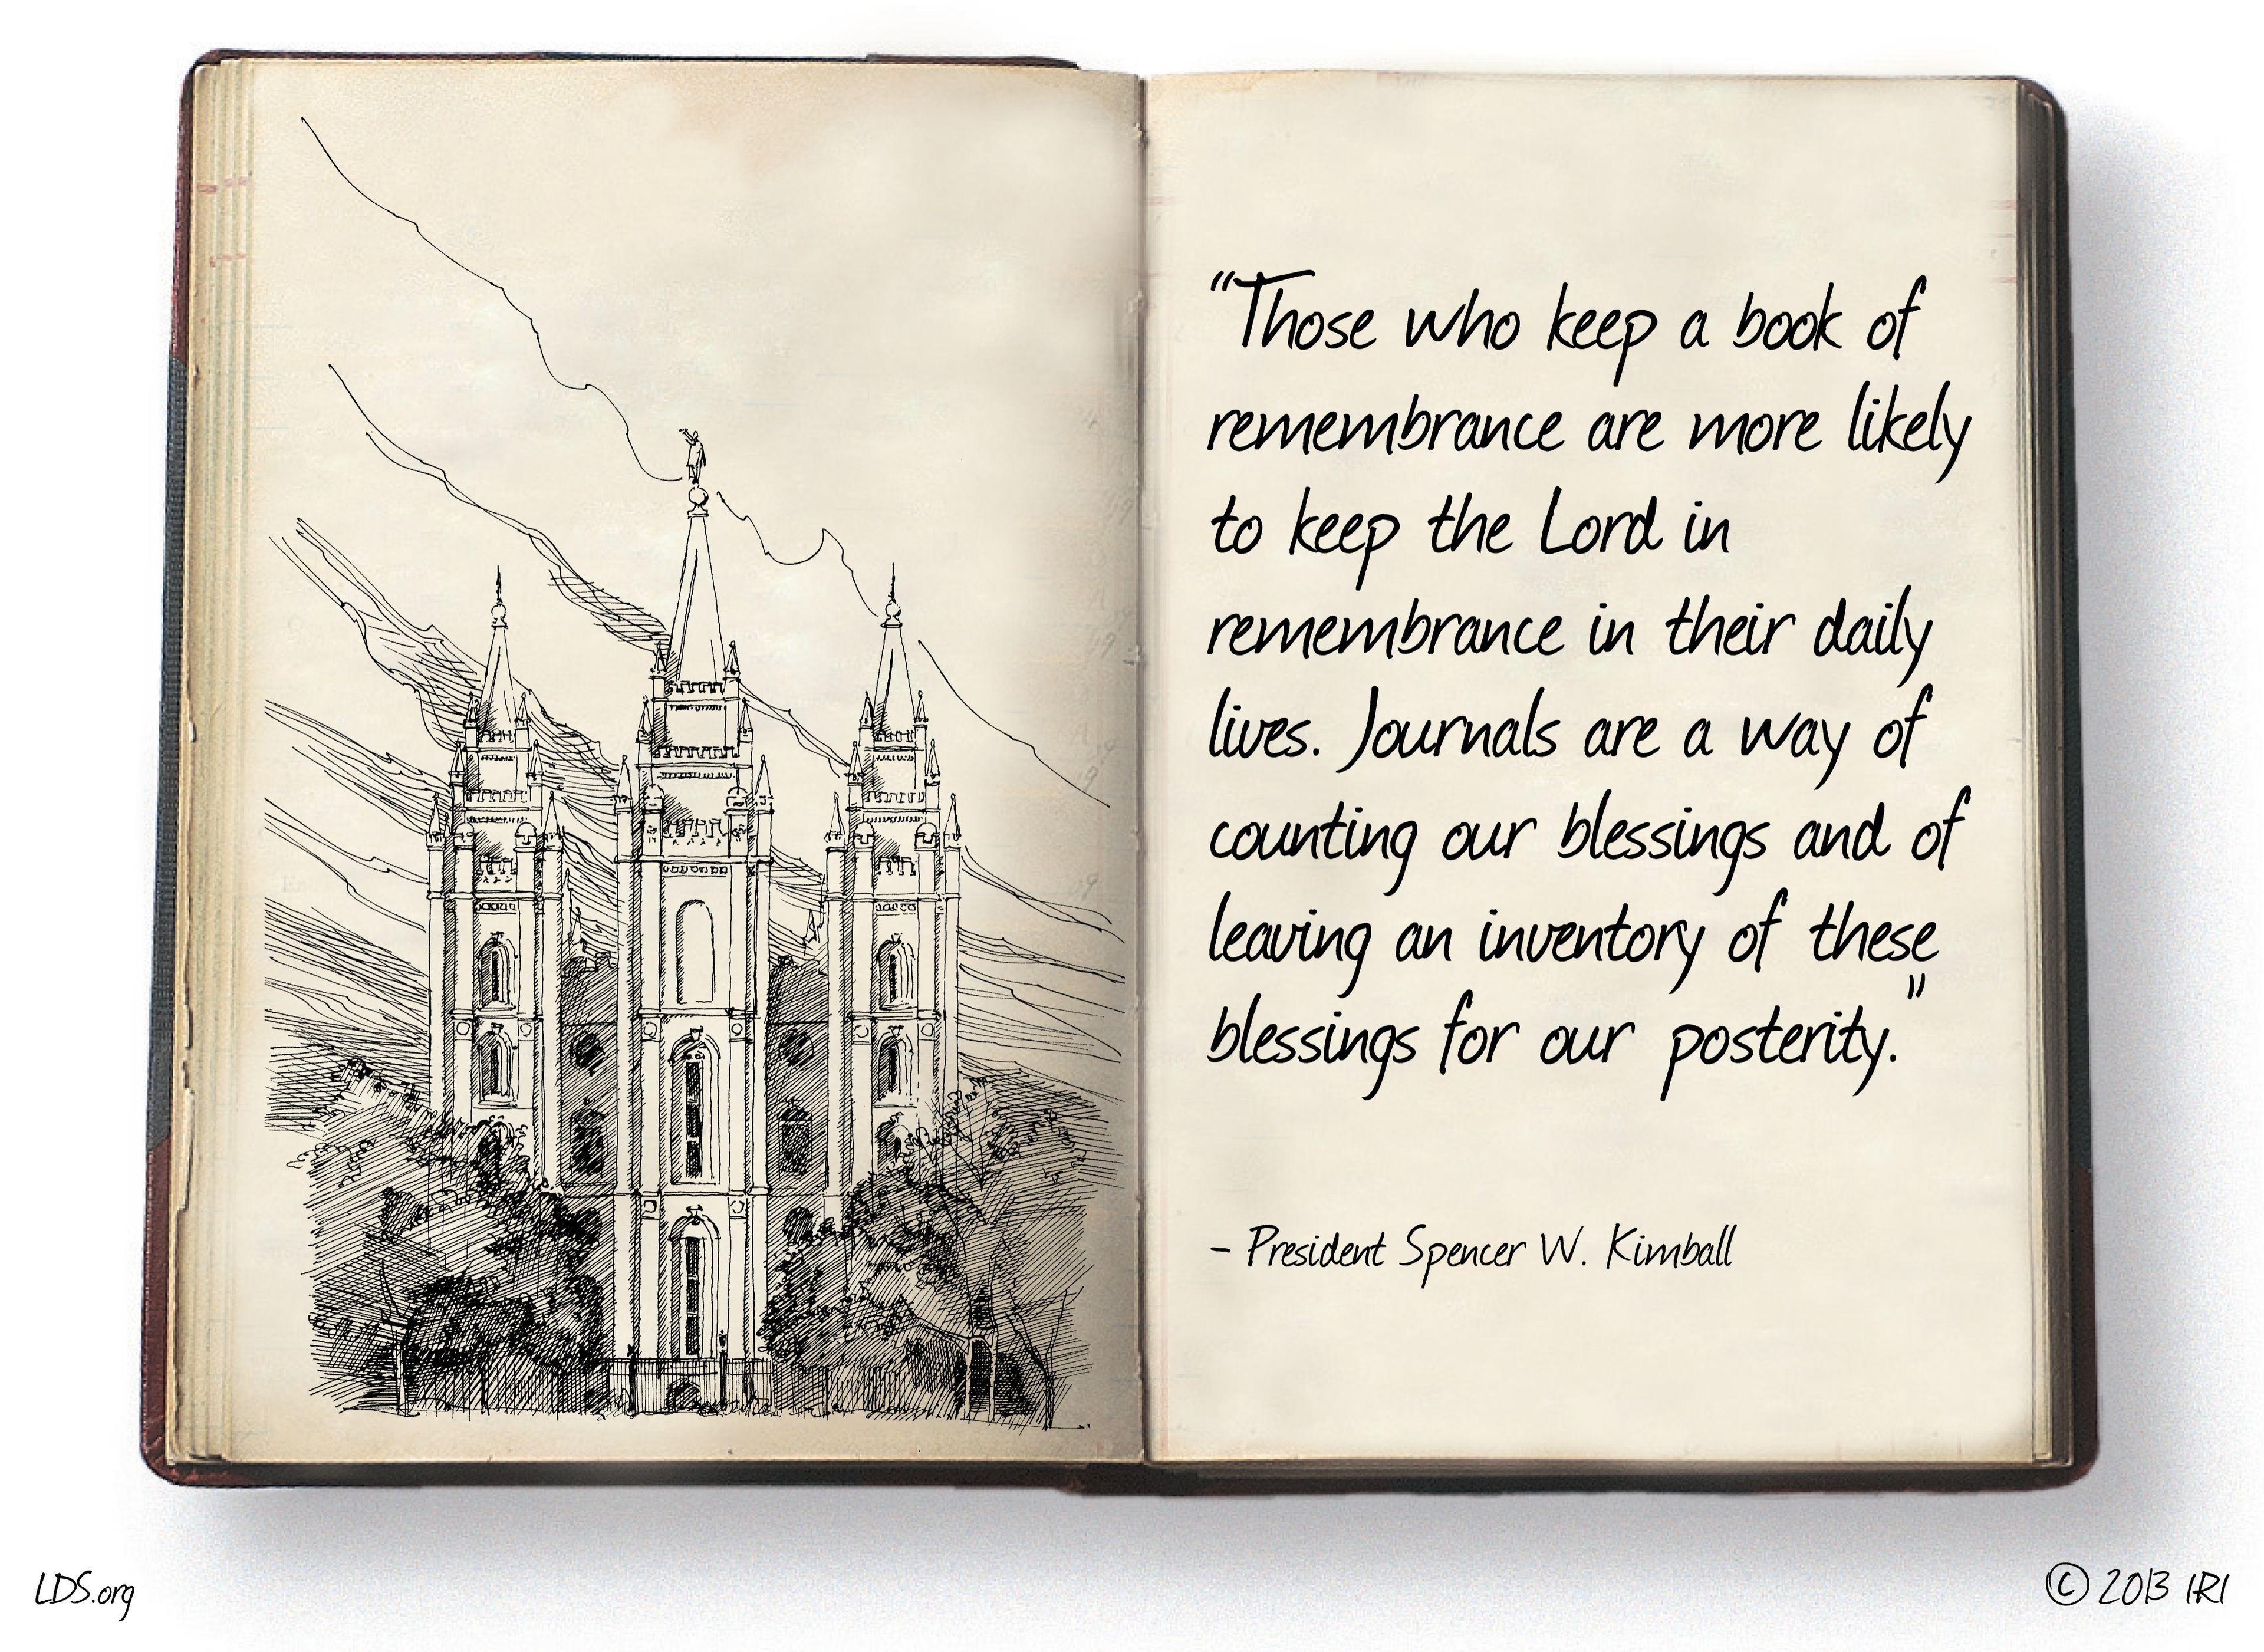 “Those who keep a book of remembrance are more likely to keep the Lord in remembrance in their daily lives. Journals are a way of counting our blessings and of leaving an inventory of these blessings for our posterity.”—President Spencer W. Kimball, “Listen to the Prophets” © undefined ipCode 1.